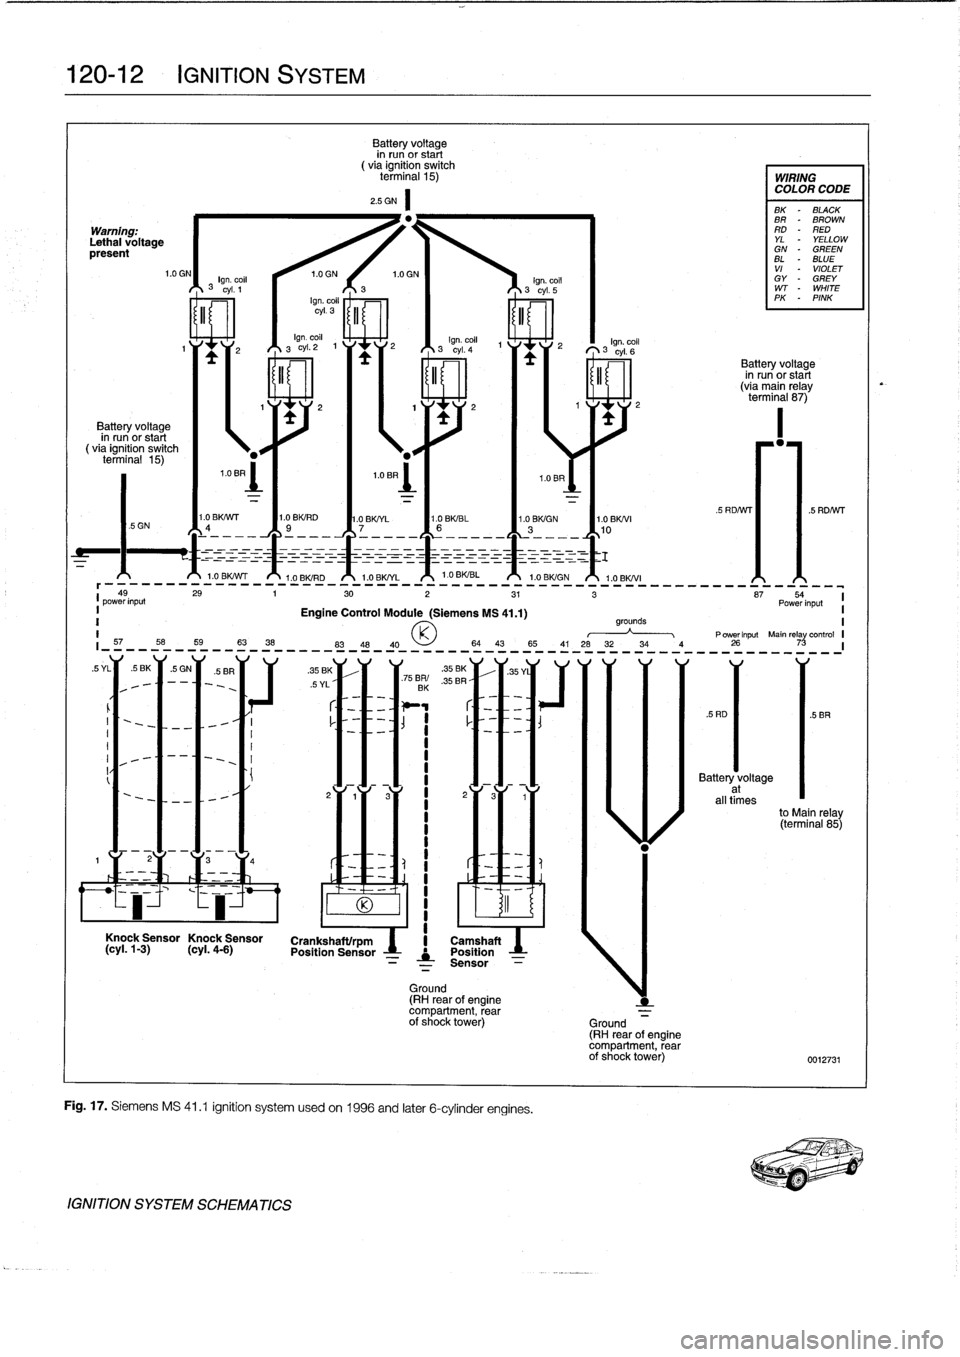 BMW M3 1995 E36 Owners Guide 
120-12

	

IGNITION
SYSTEM

Warning
.
Lethal
voltagepresent

Battery
voltage
in
run
or
start
(via
ignitíon
switch
terminal
15)

I
t

IGNITION
SYSTEM
SCHEMATICS

Battery
voltage
in
run
or
start
(
via